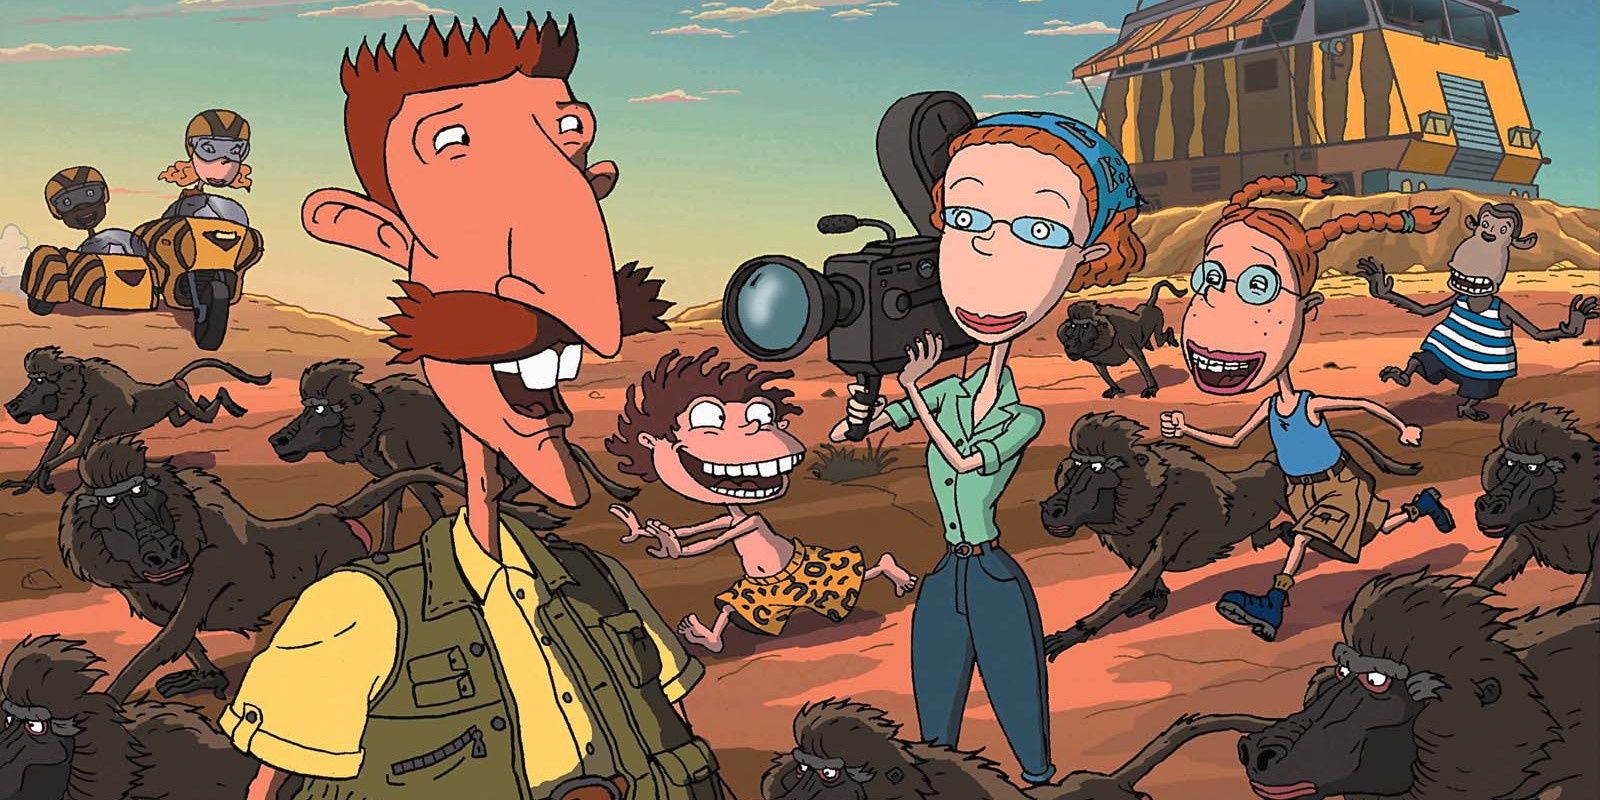 The Wild Thornberrys run across the outback